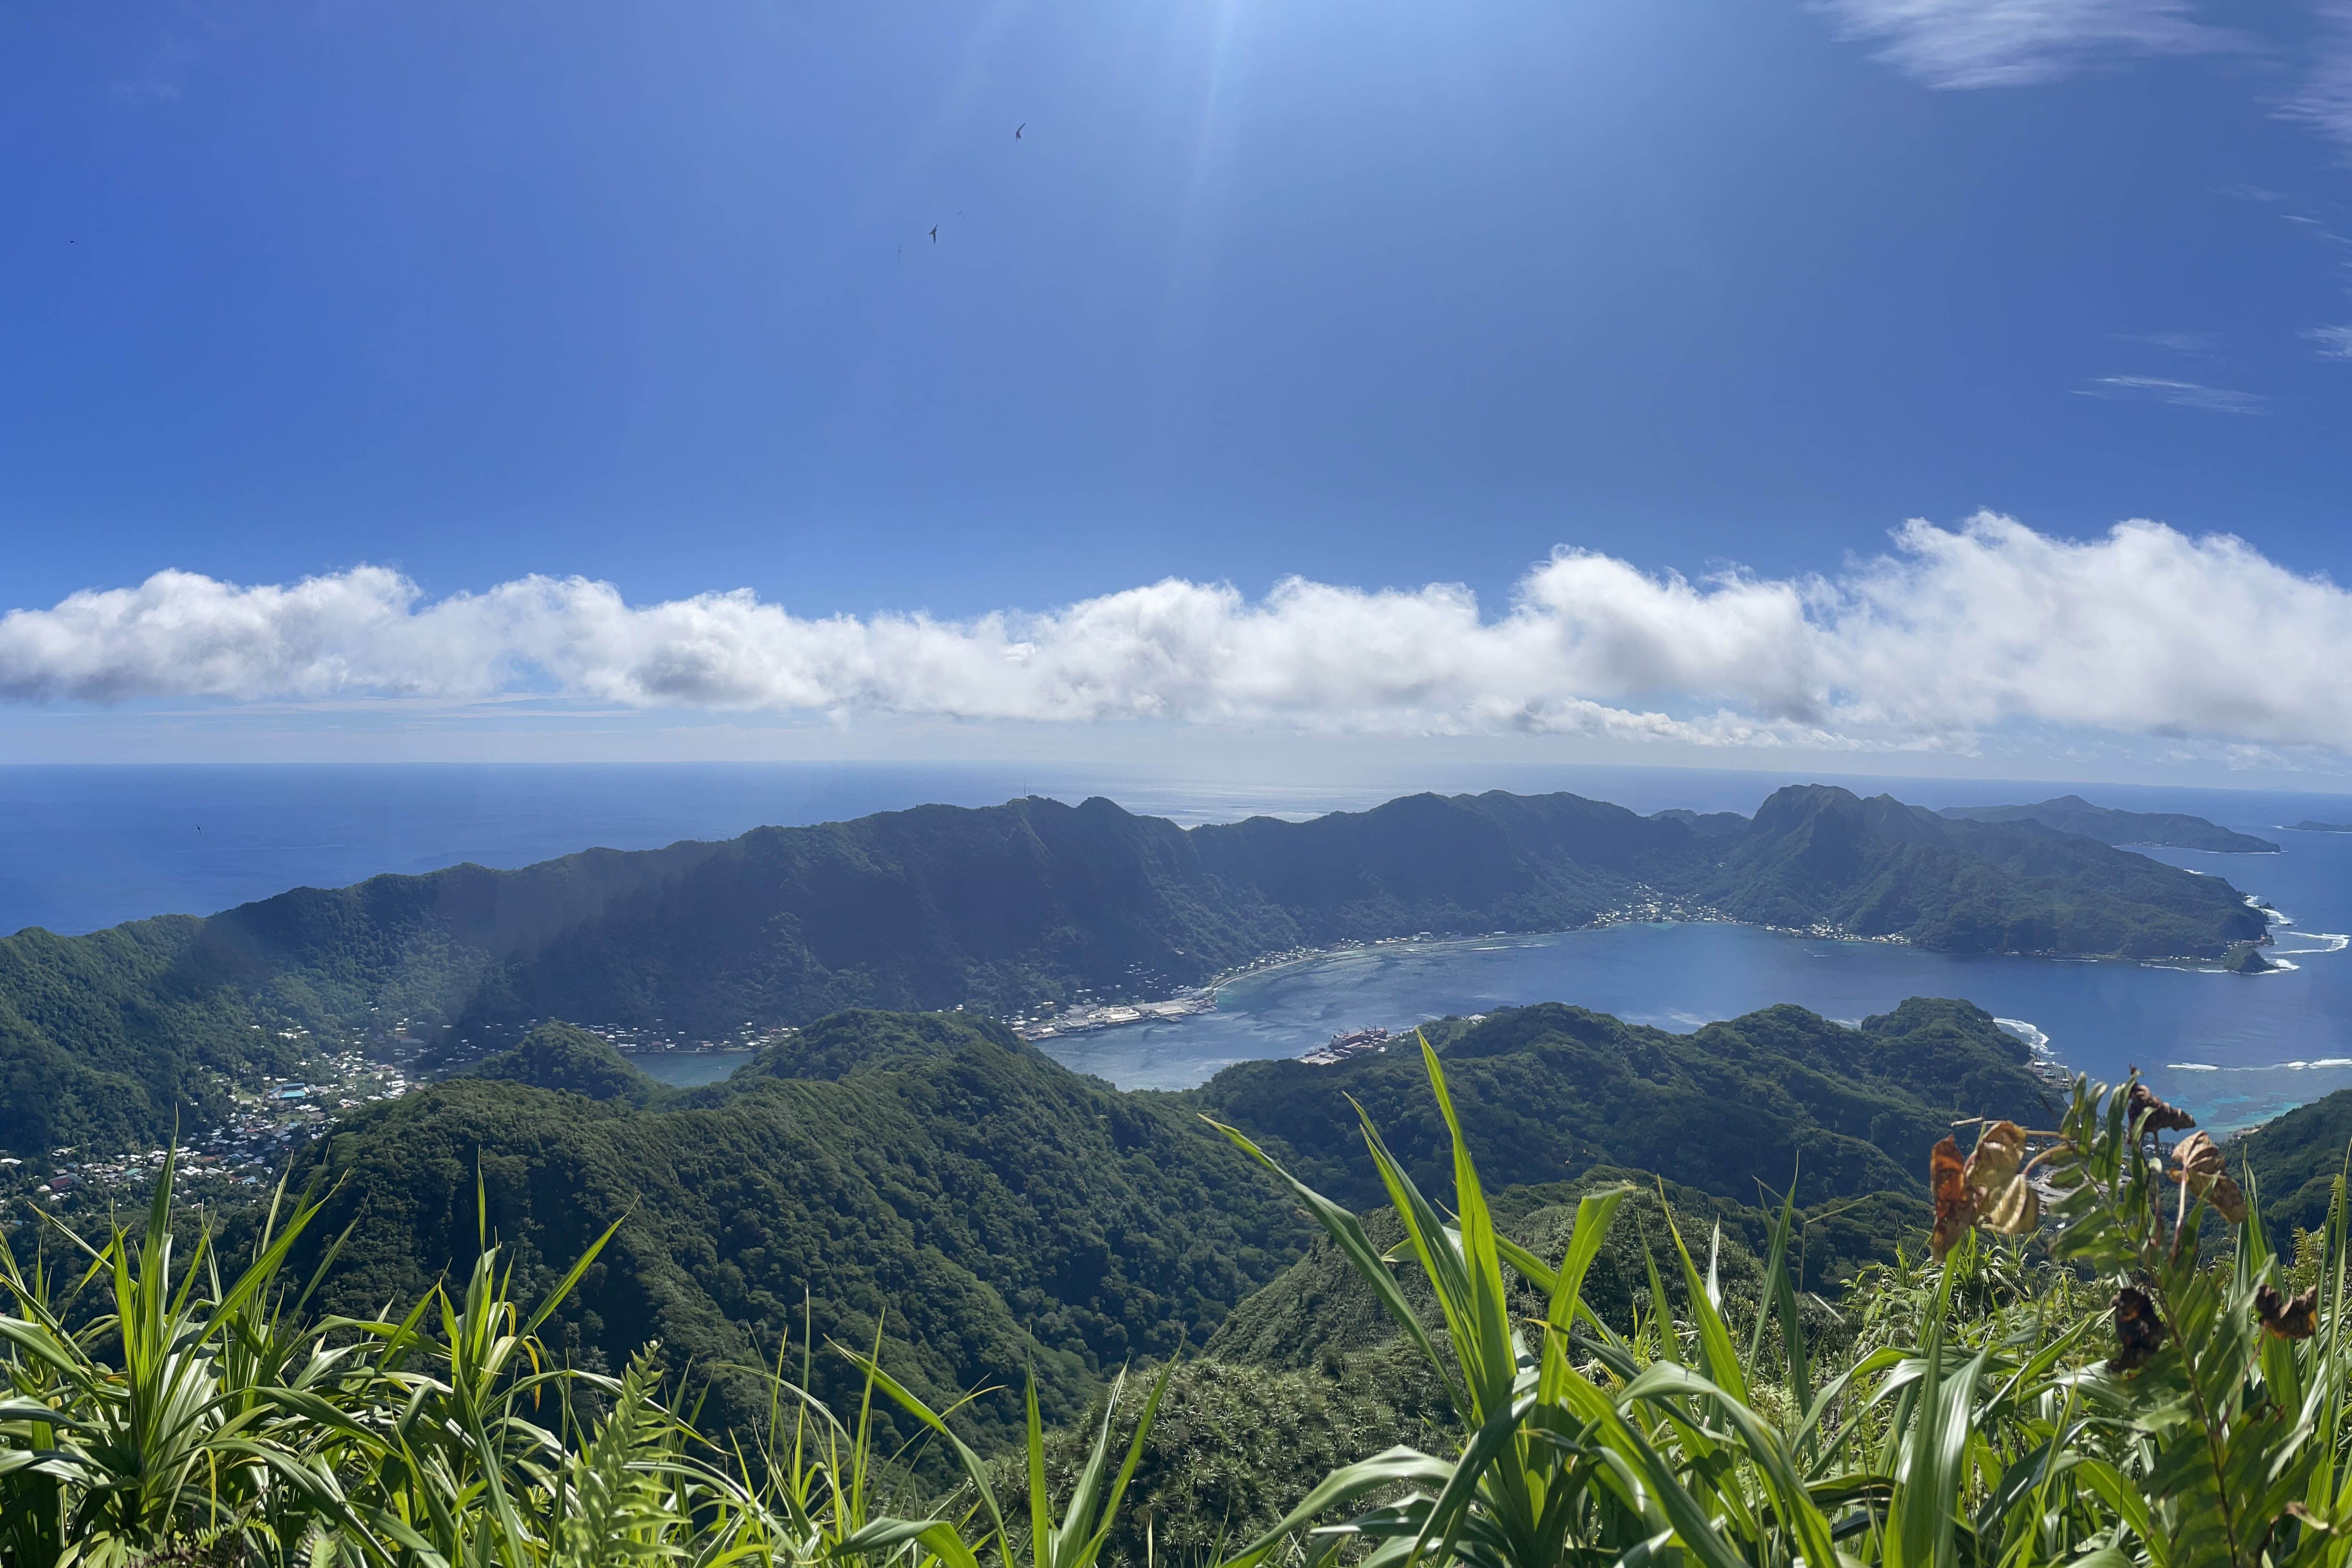 American Samoa island Tutuila is having $1.8 million available in partnership with American Samoa Power Authority to conduct a basin study.